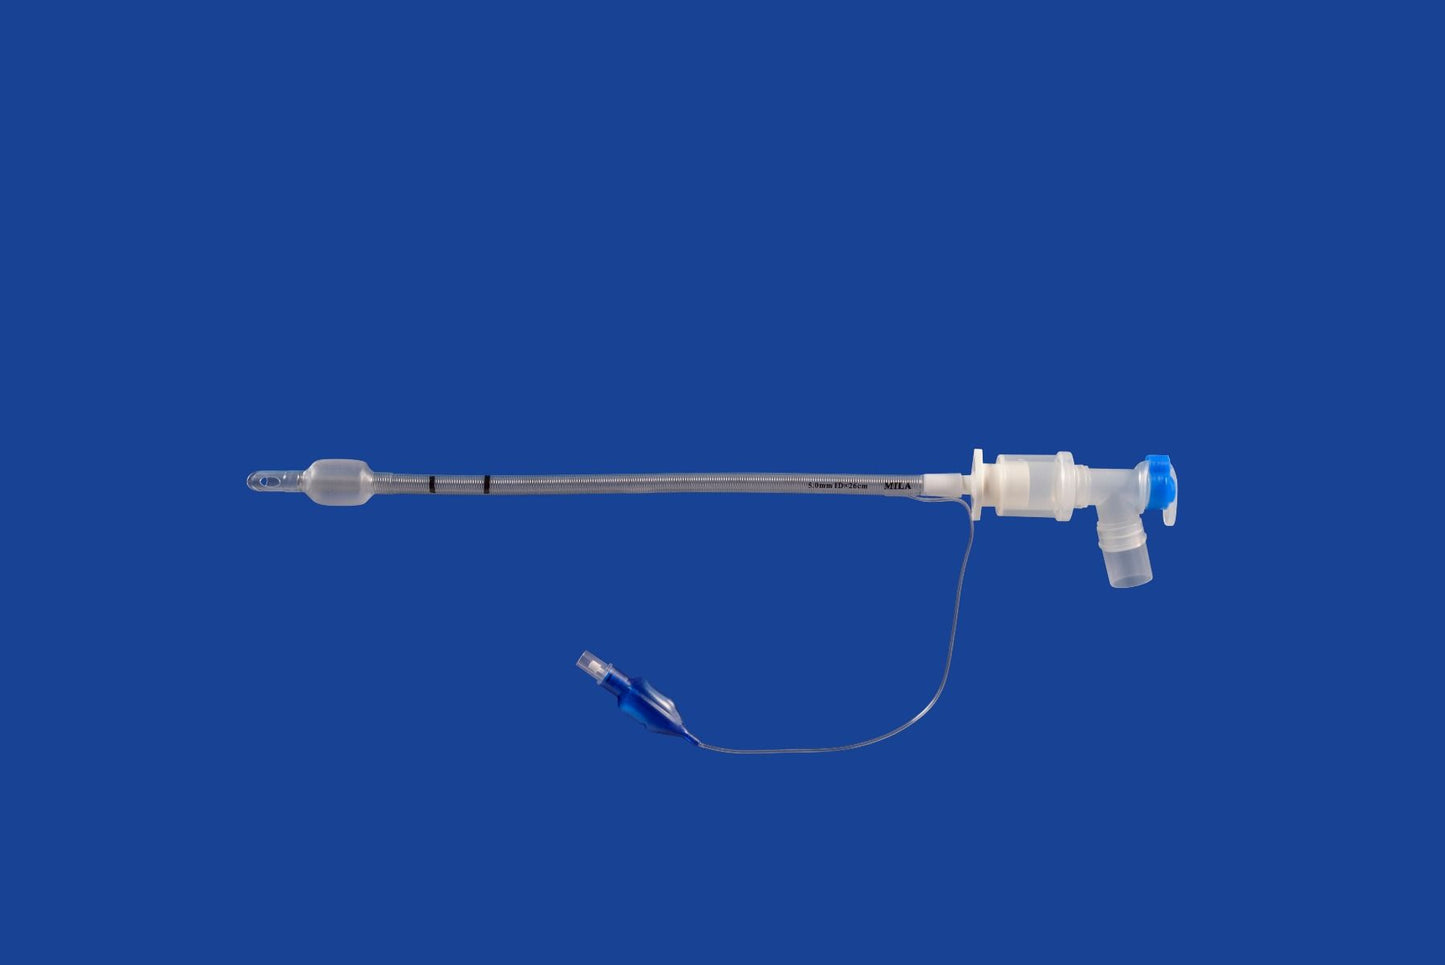 Tracheal Tube Connector, 15mm